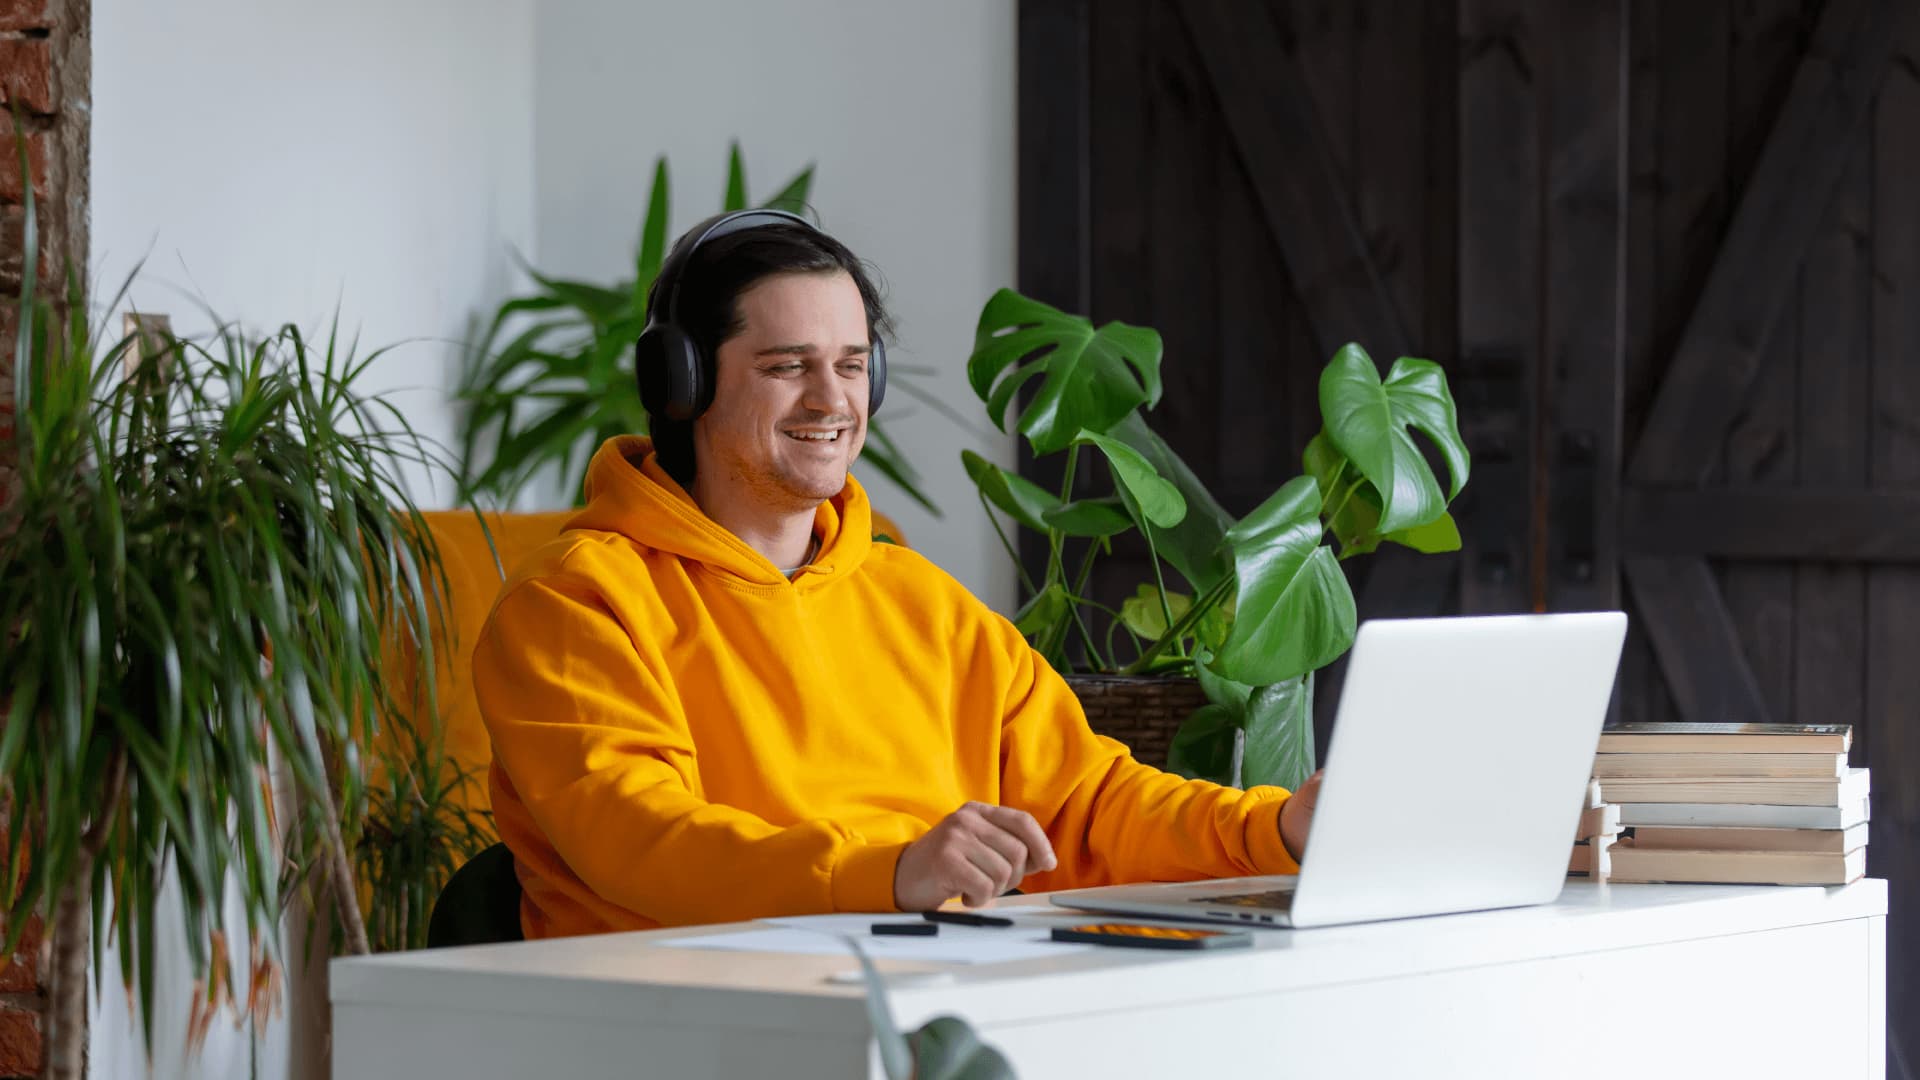 Man wearing an orange hoodie and headphones sitting at a desk is working with algorithms and data sets